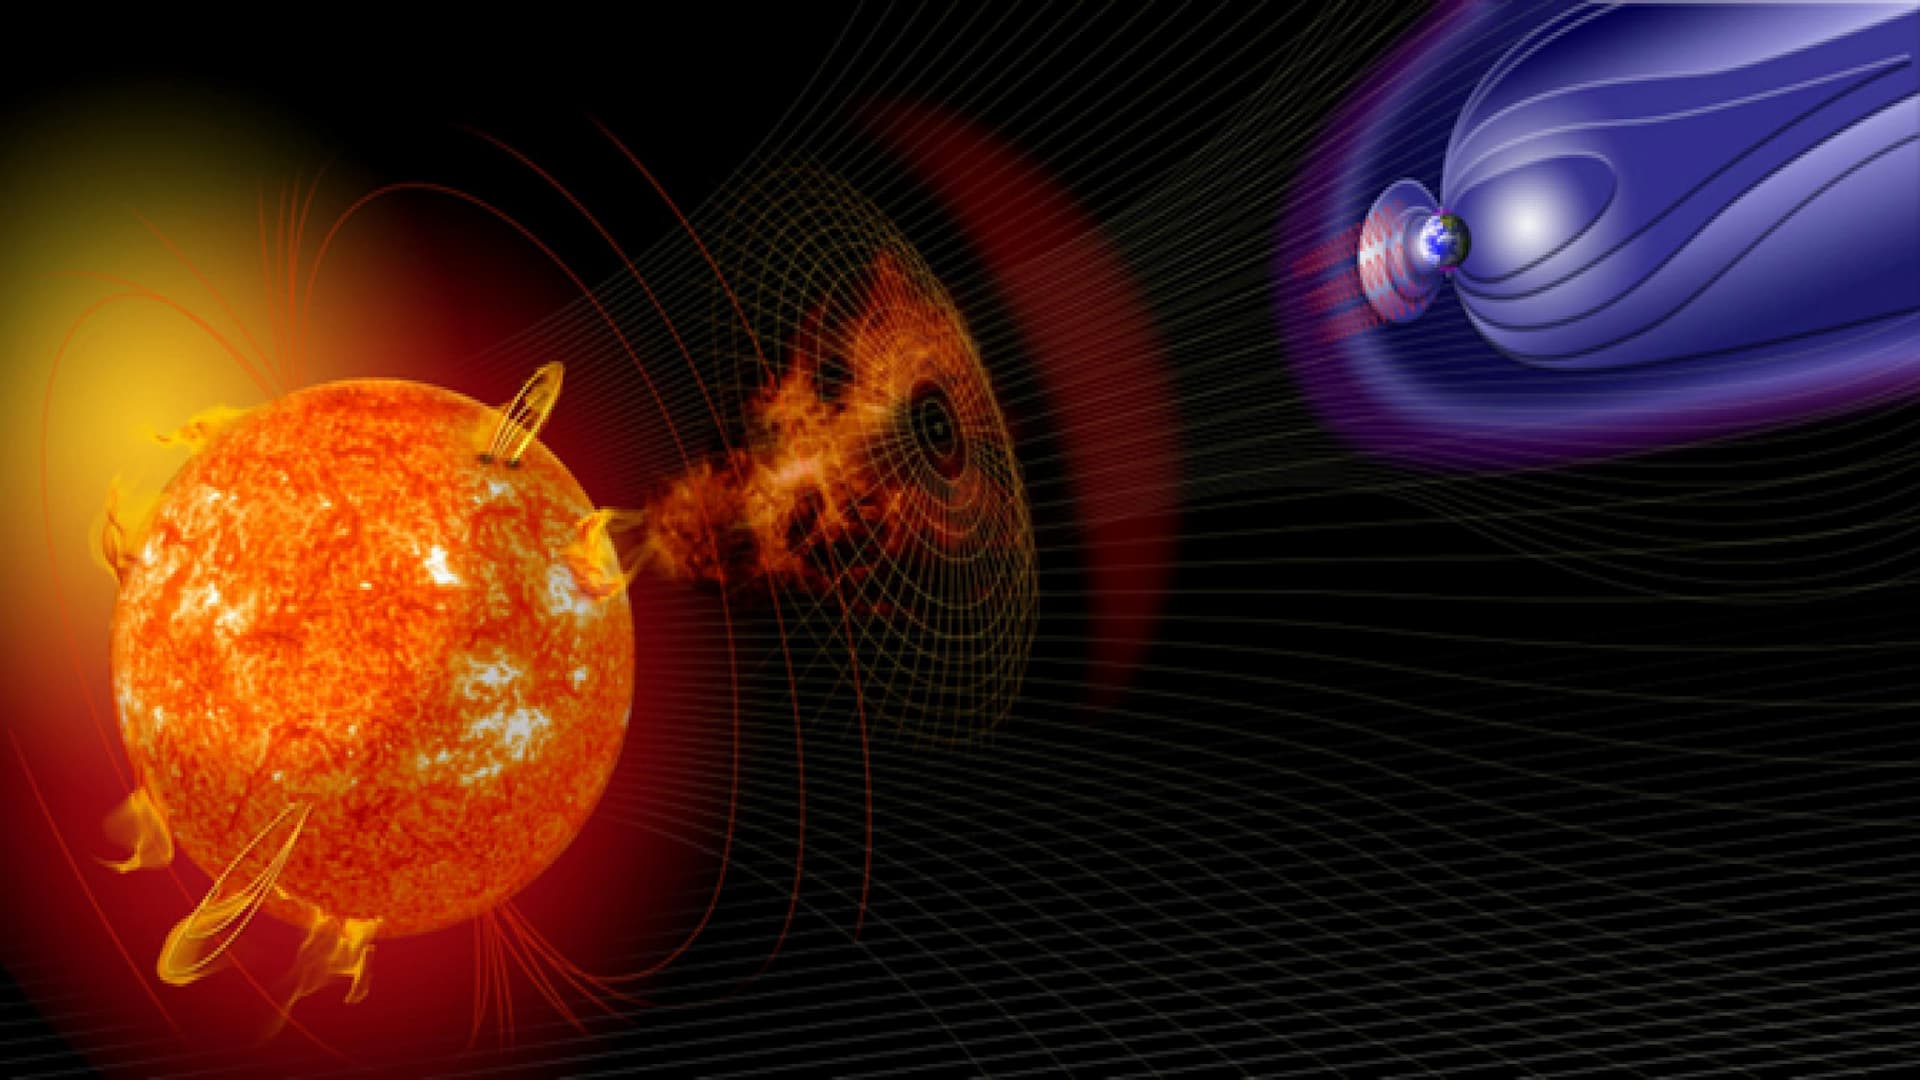 ASI - MoRe-ASI: Large-scale solar wind structures in the heliosphere and their Space Weather impact